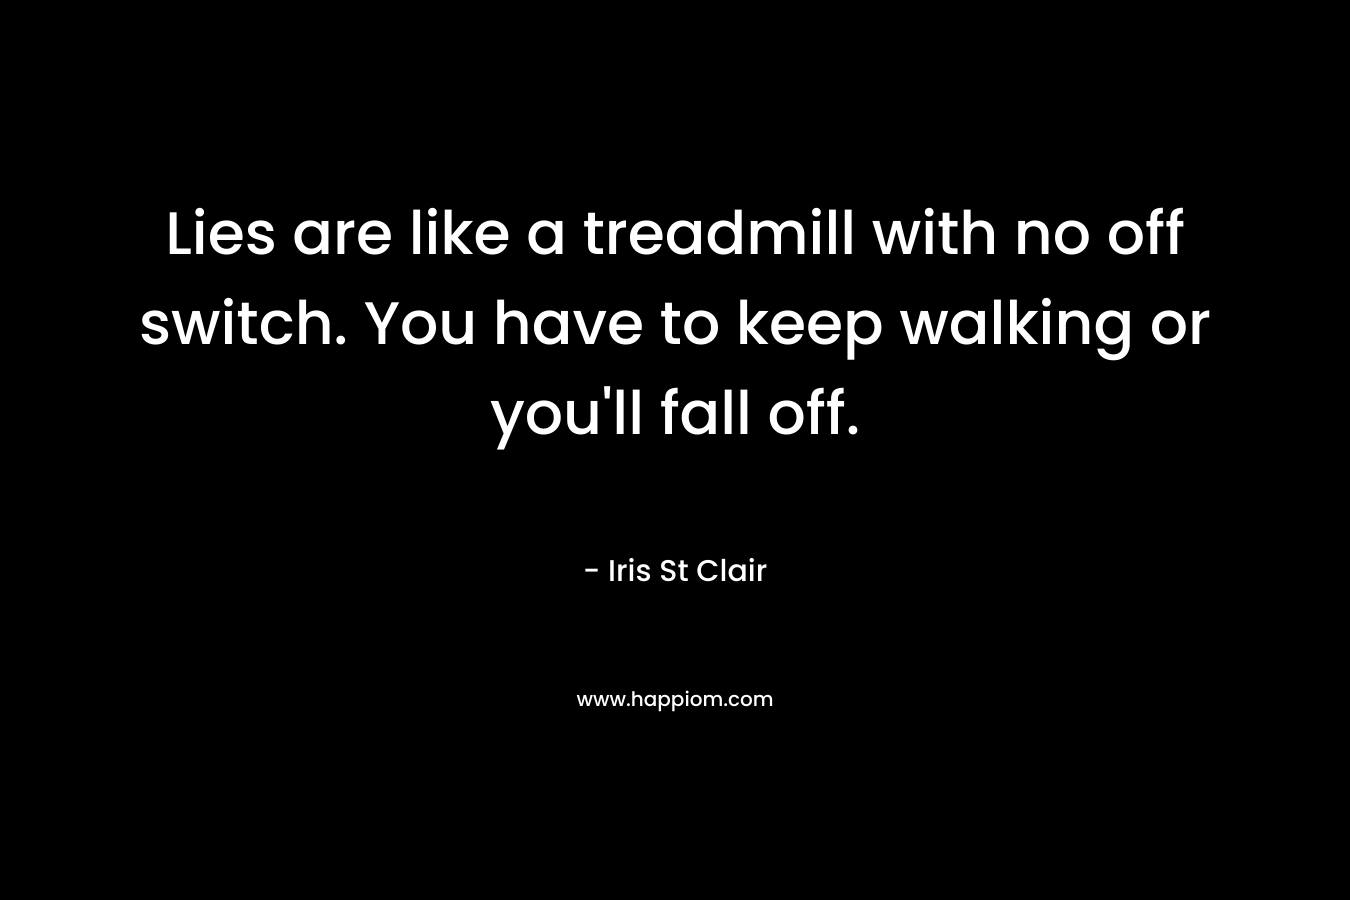 Lies are like a treadmill with no off switch. You have to keep walking or you’ll fall off. – Iris St Clair